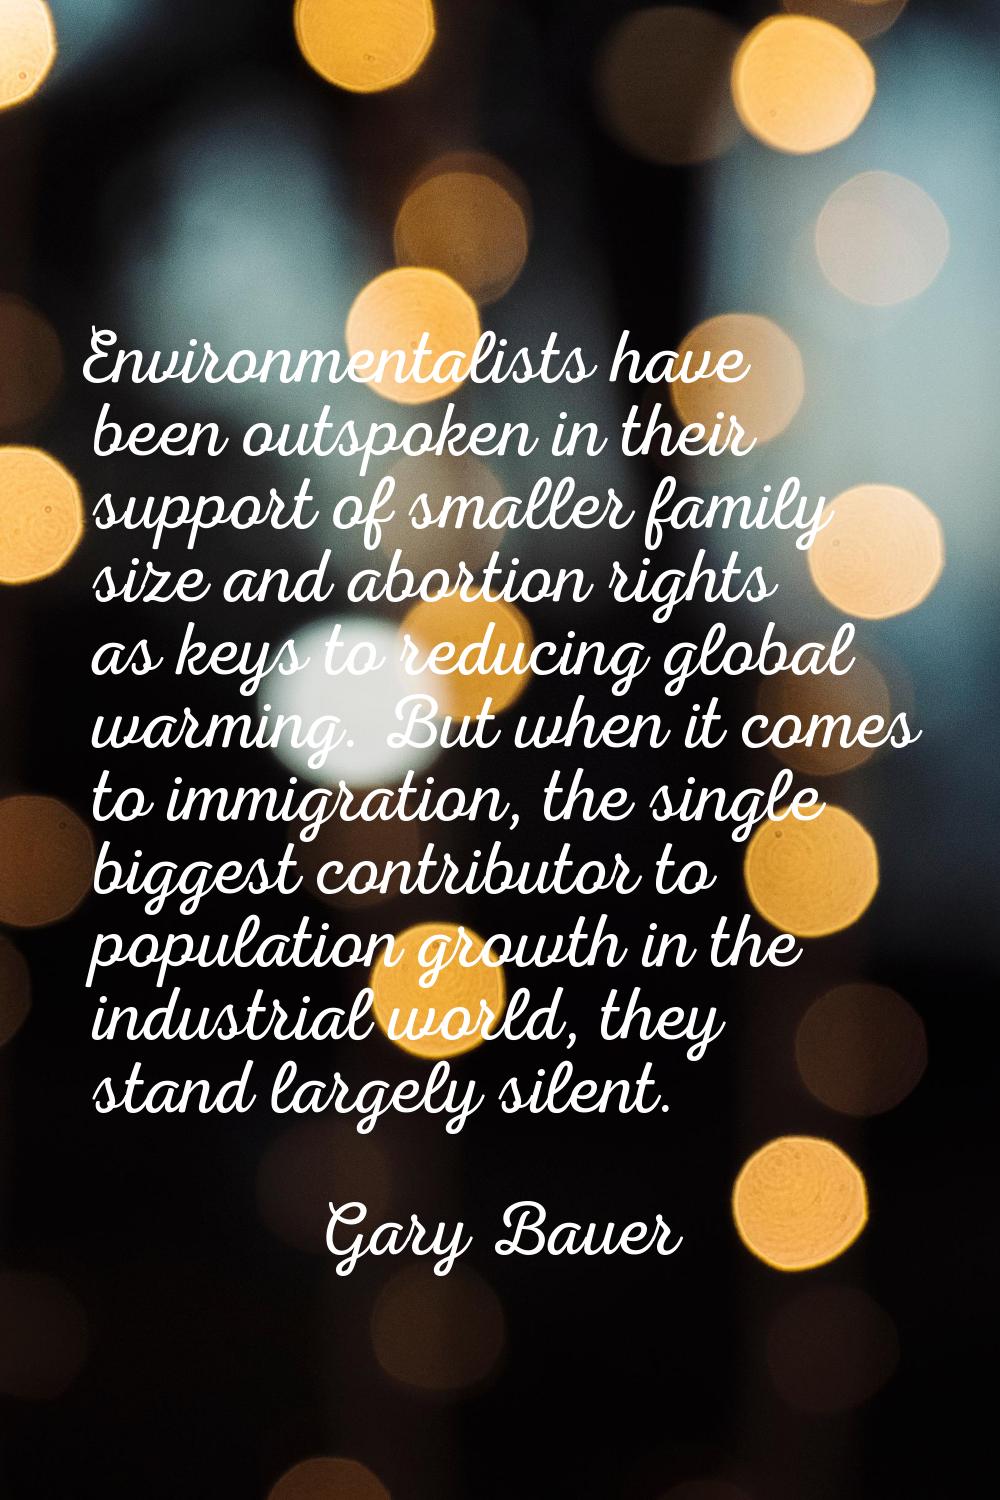 Environmentalists have been outspoken in their support of smaller family size and abortion rights a